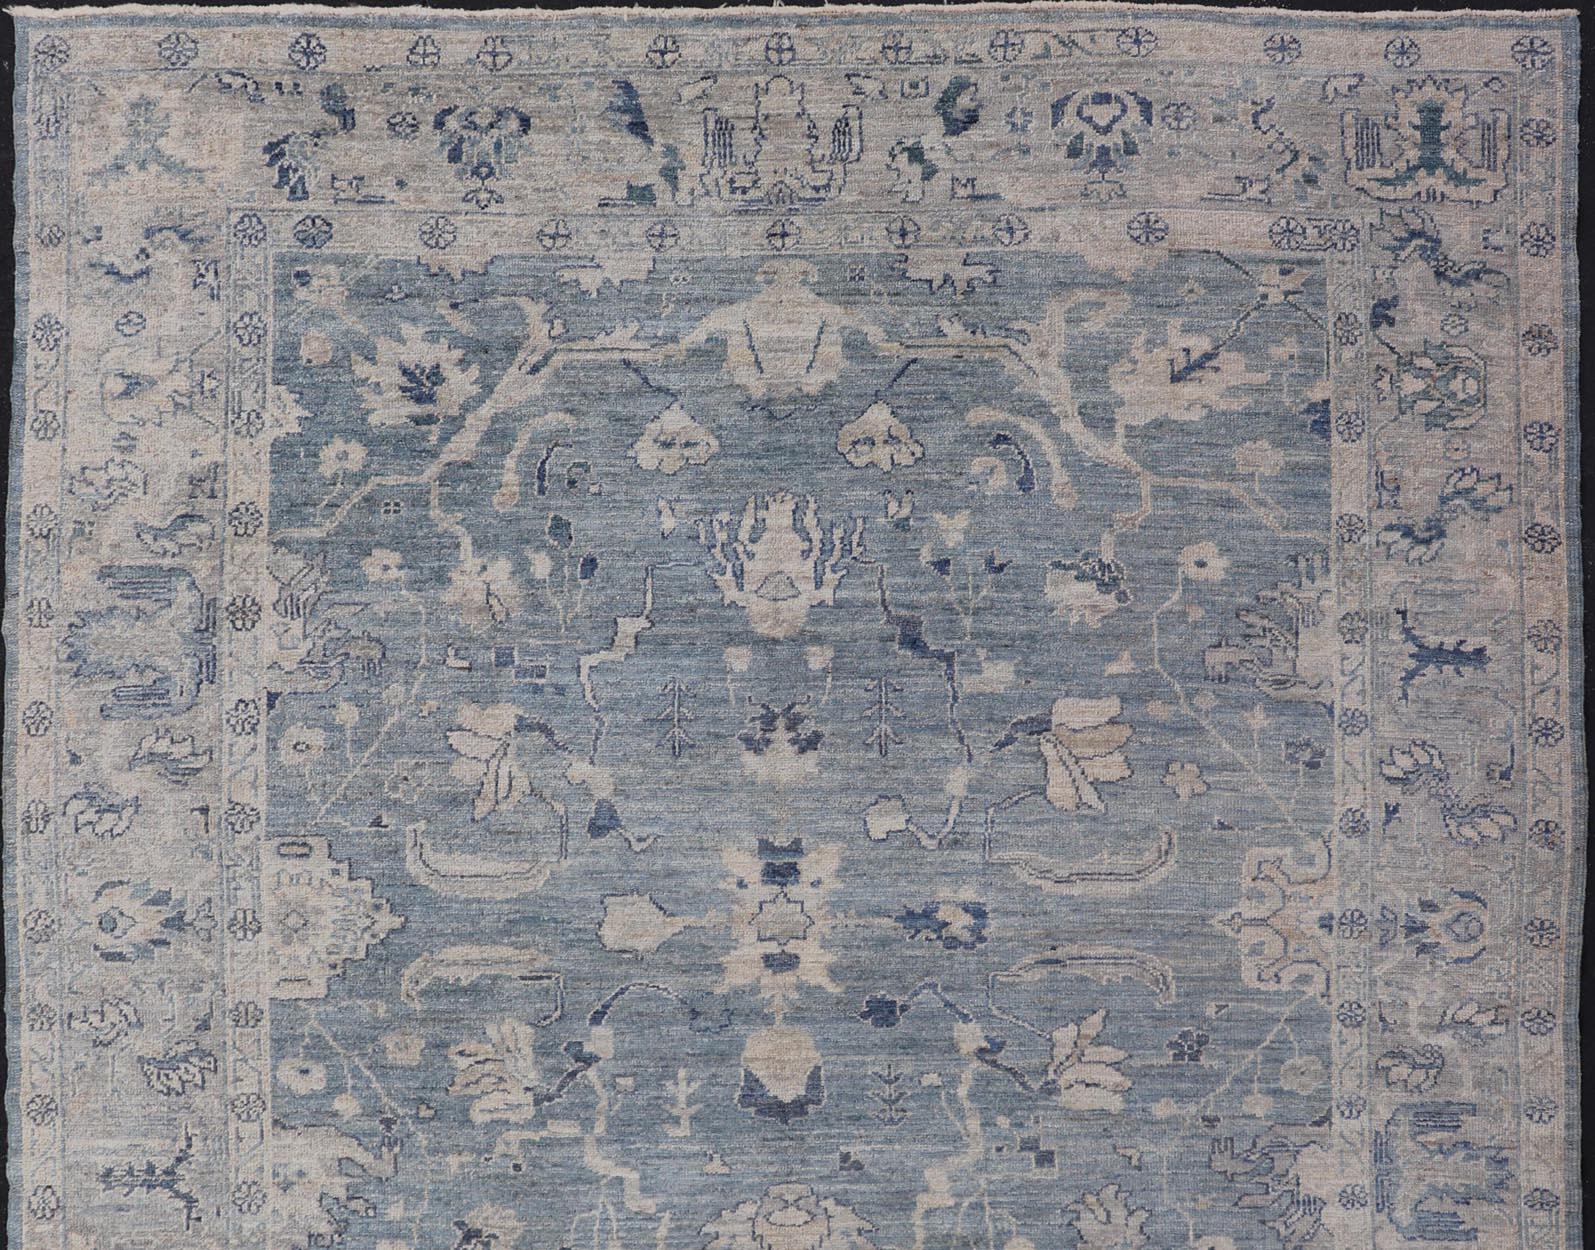 Turkish Angora Oushak Rug in Dusty Blue Background and Silver Border For Sale 4